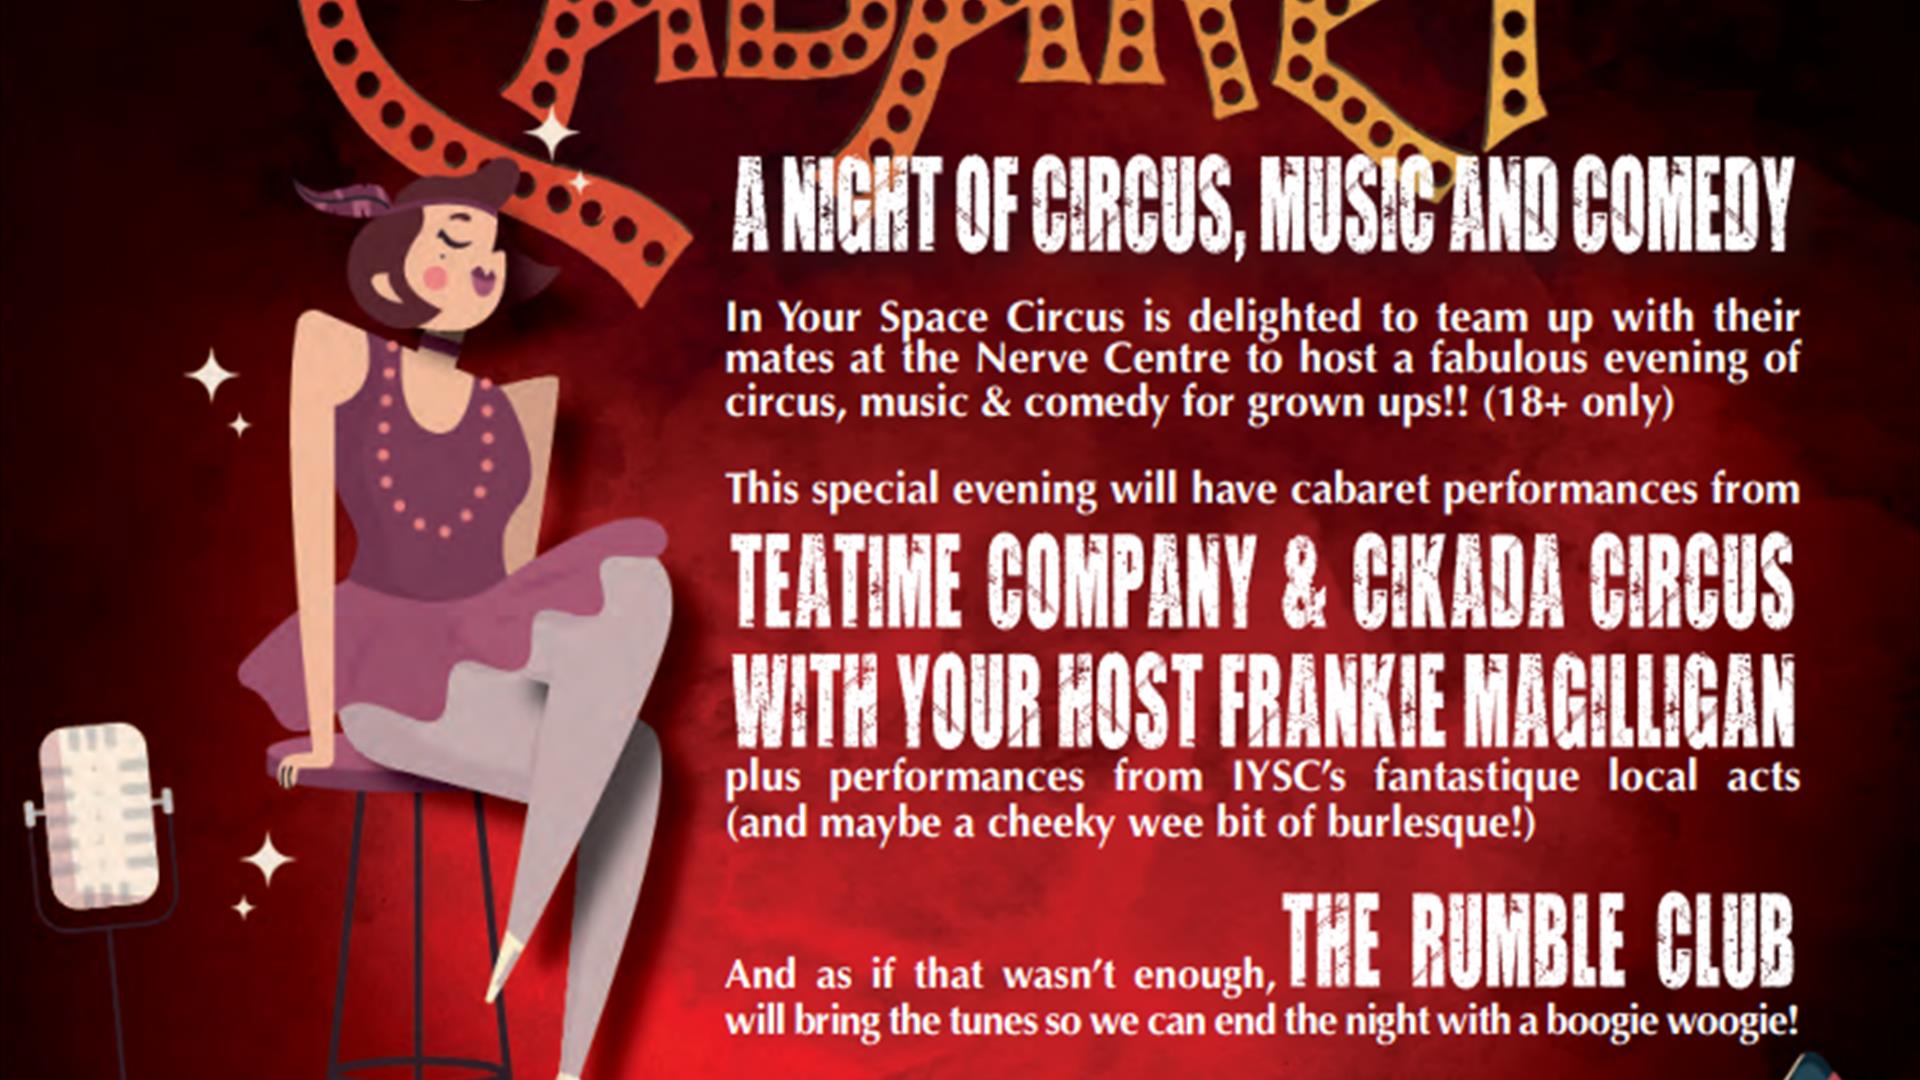 Poster for the Curious Cabaret - a night of circus, music & comedy.